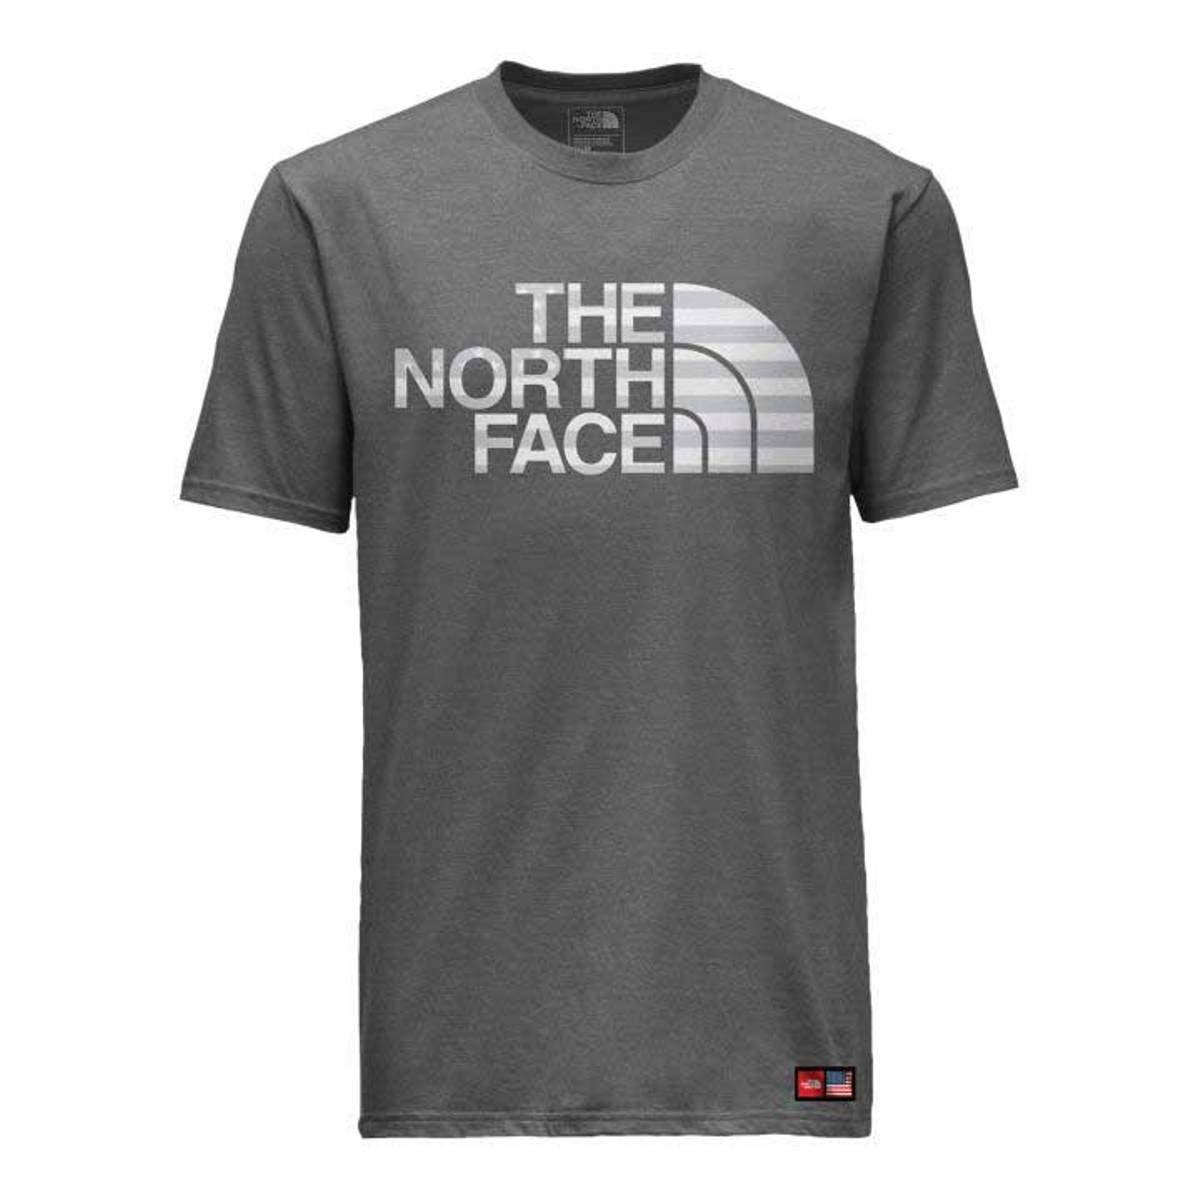 Boston proper north face mens t shirt size guide quotes – Children’s ...